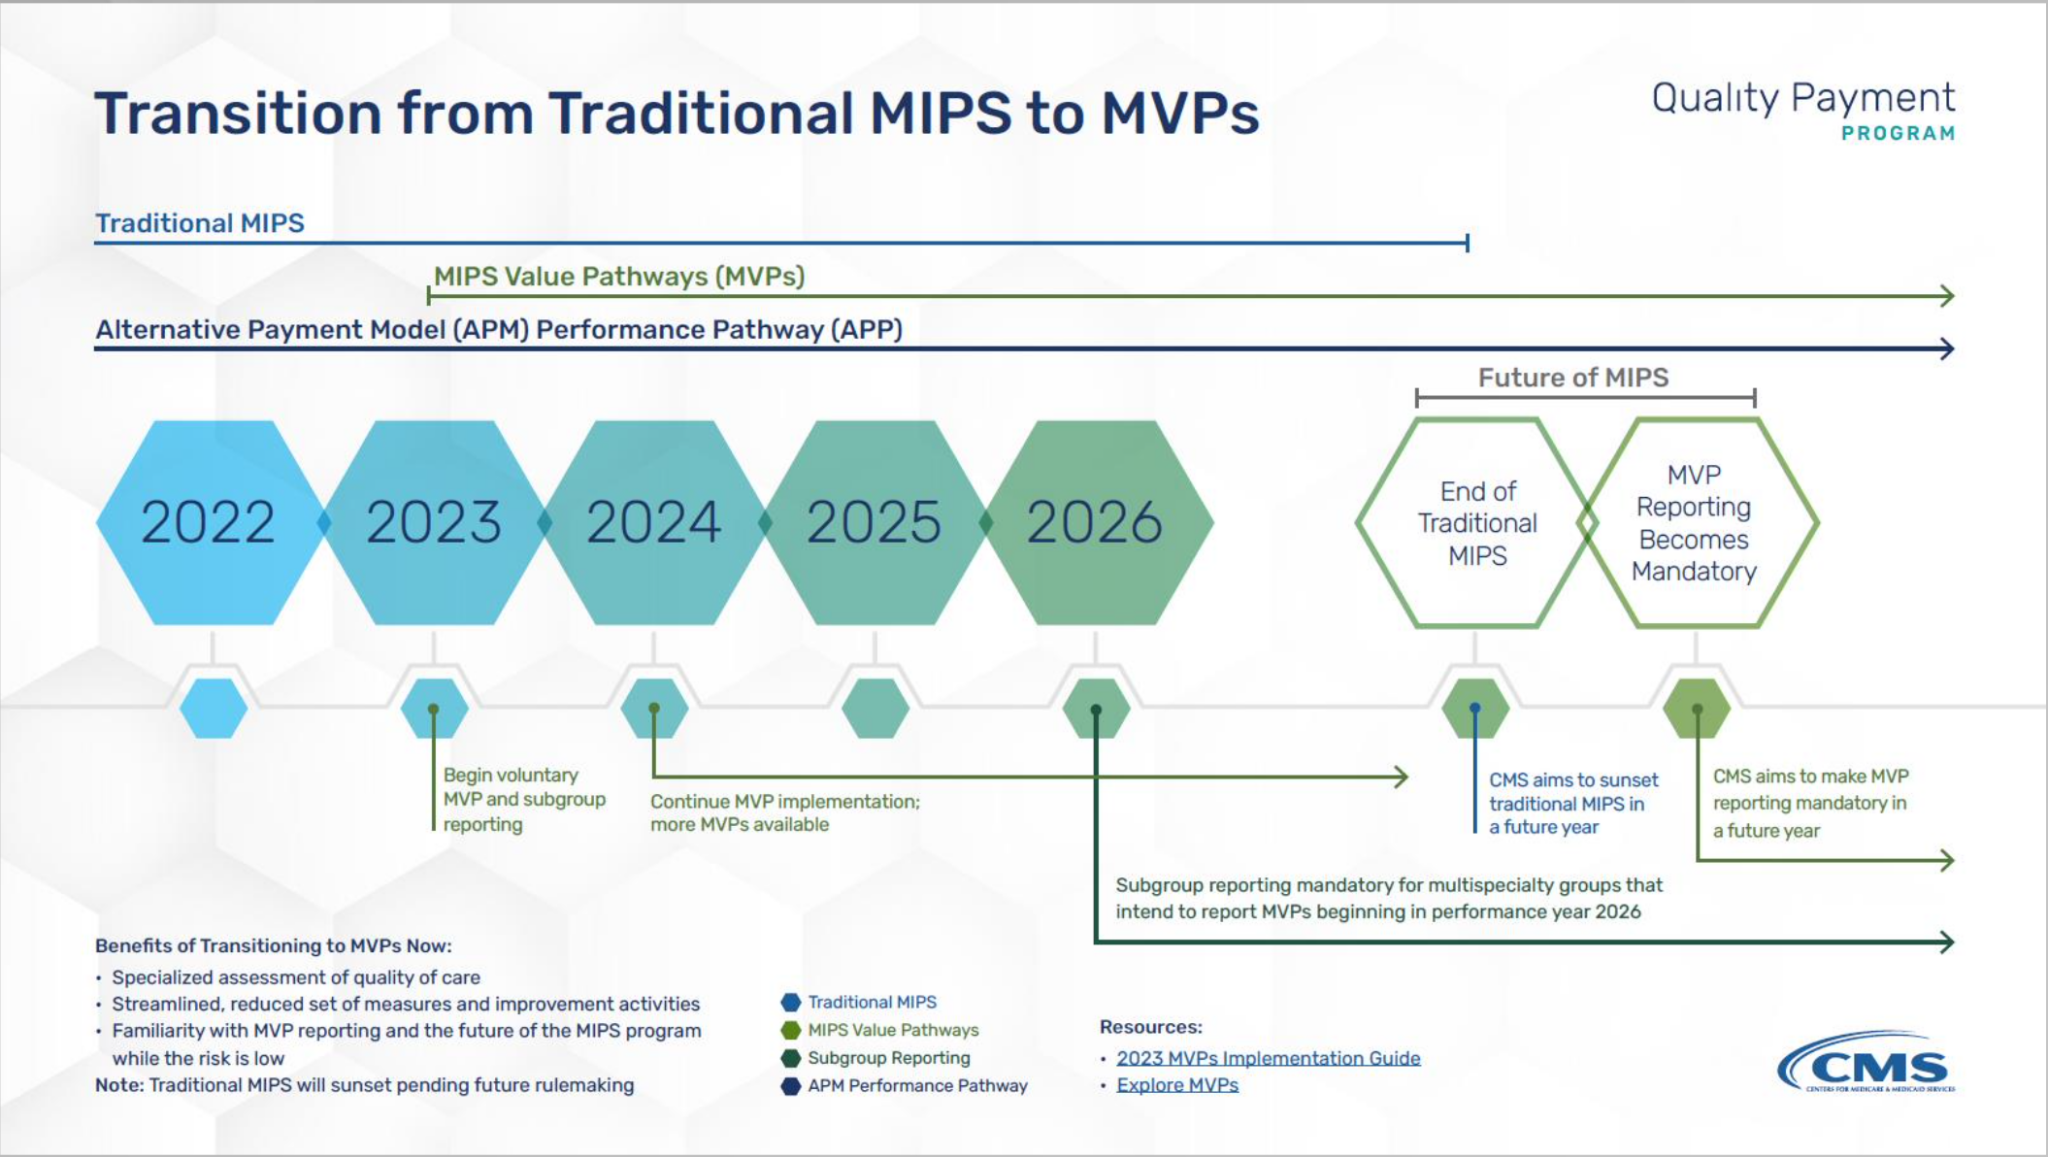 How to Participate in MIPS Value Pathways (MVPs) HCIS